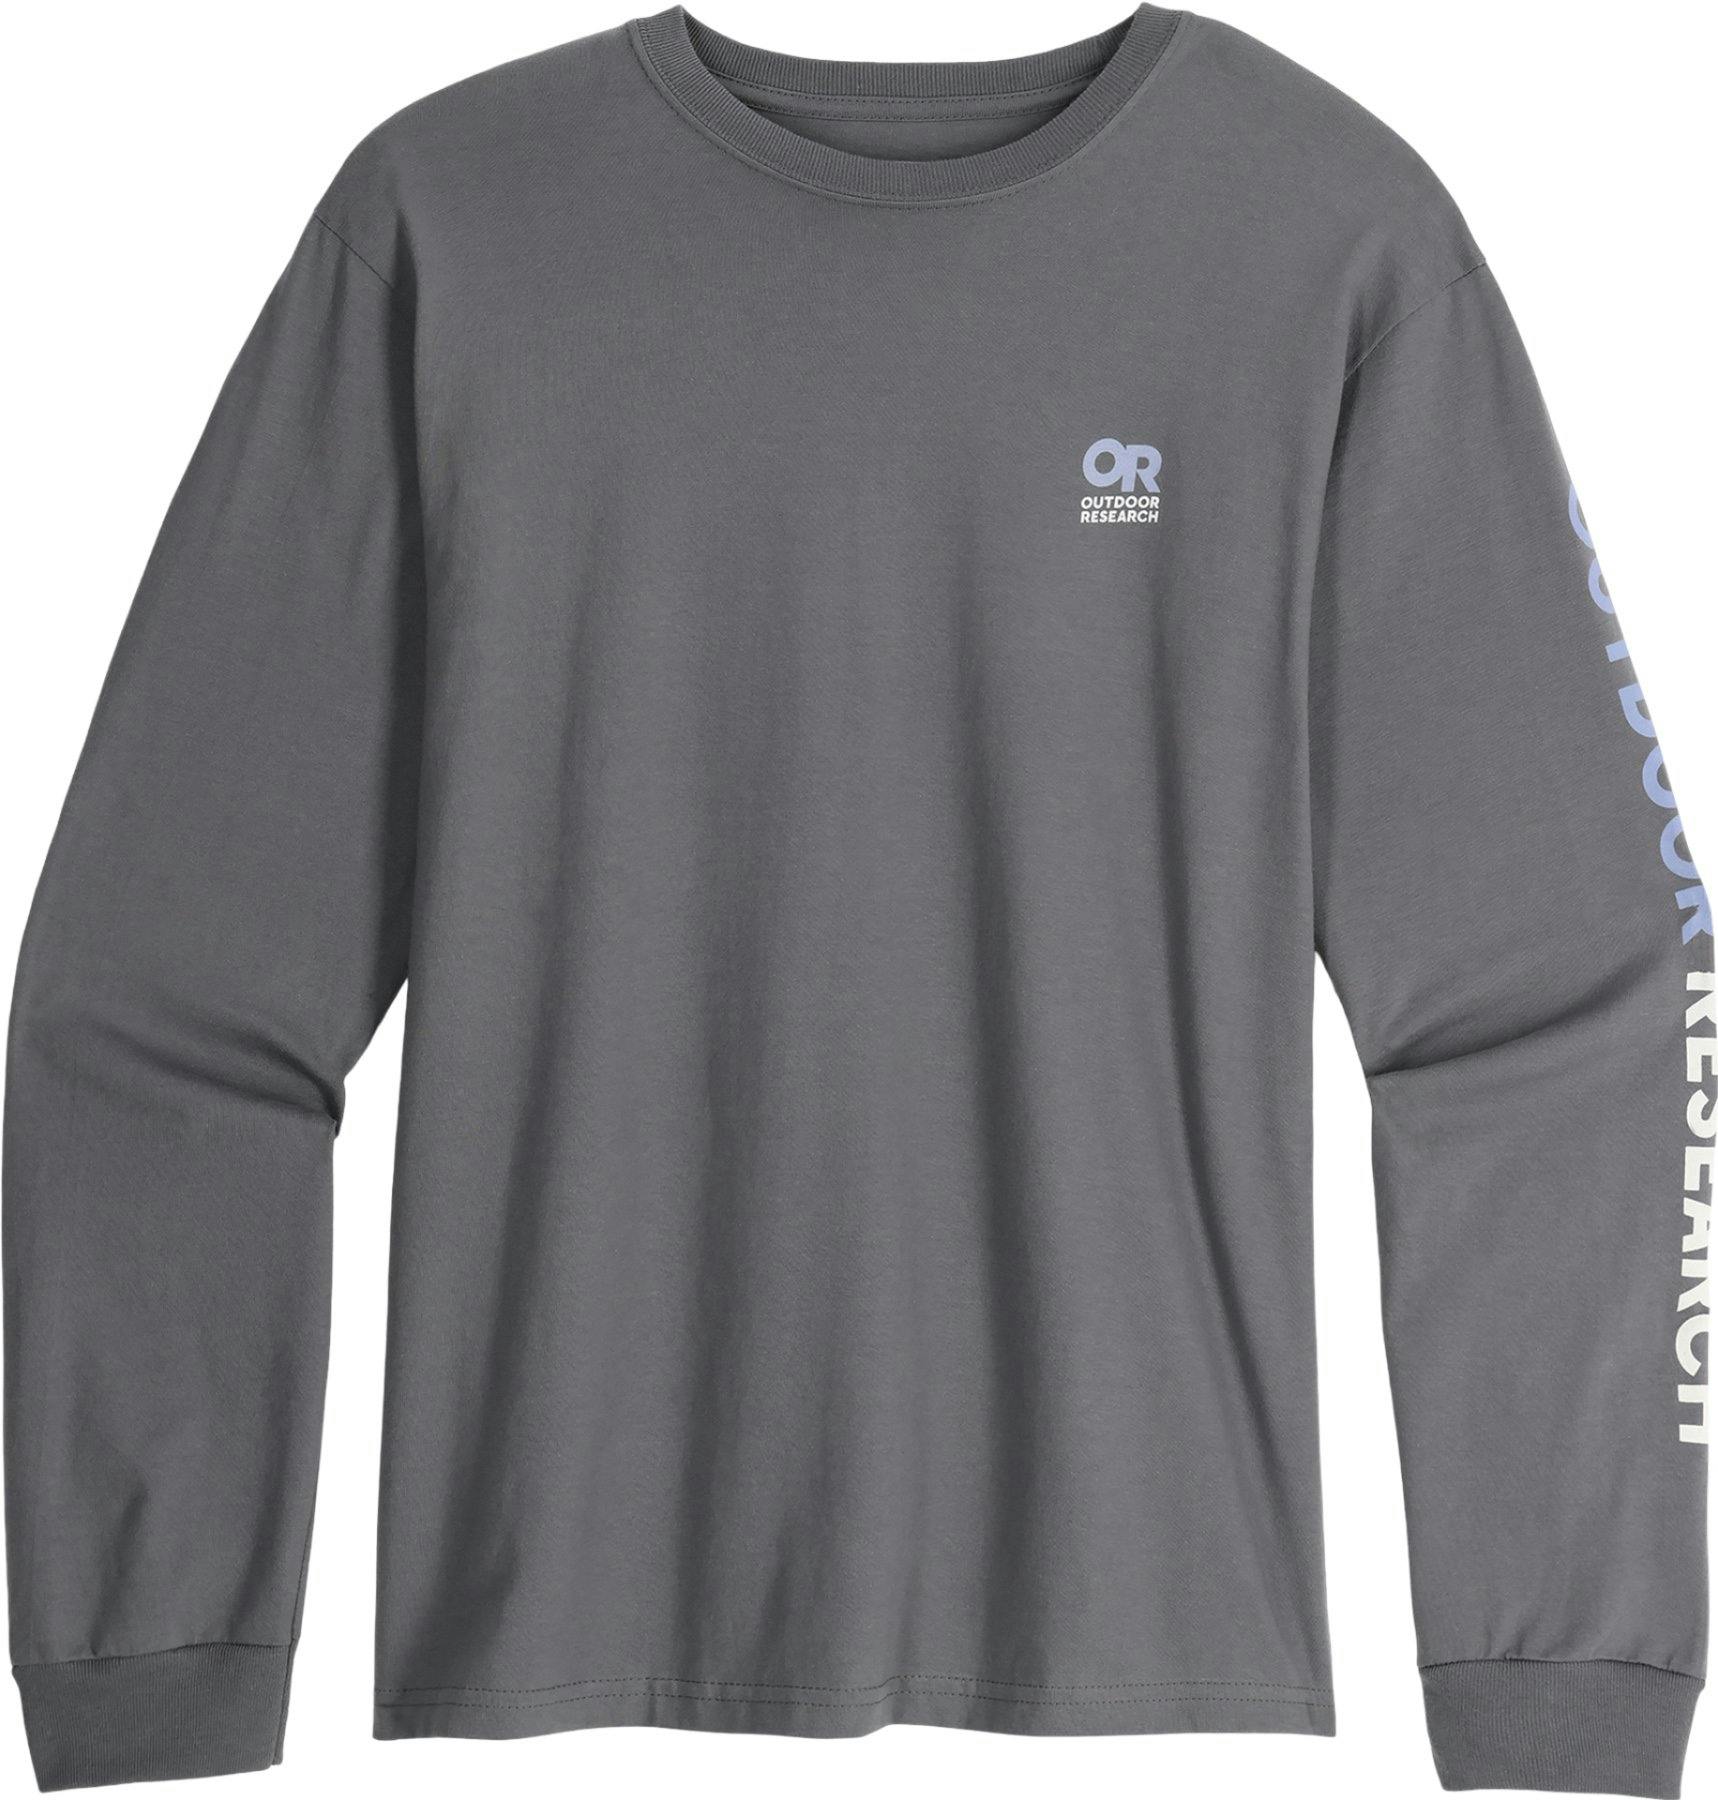 Product image for OR Lockup Chest Logo Long sleeve Tee - Unisex